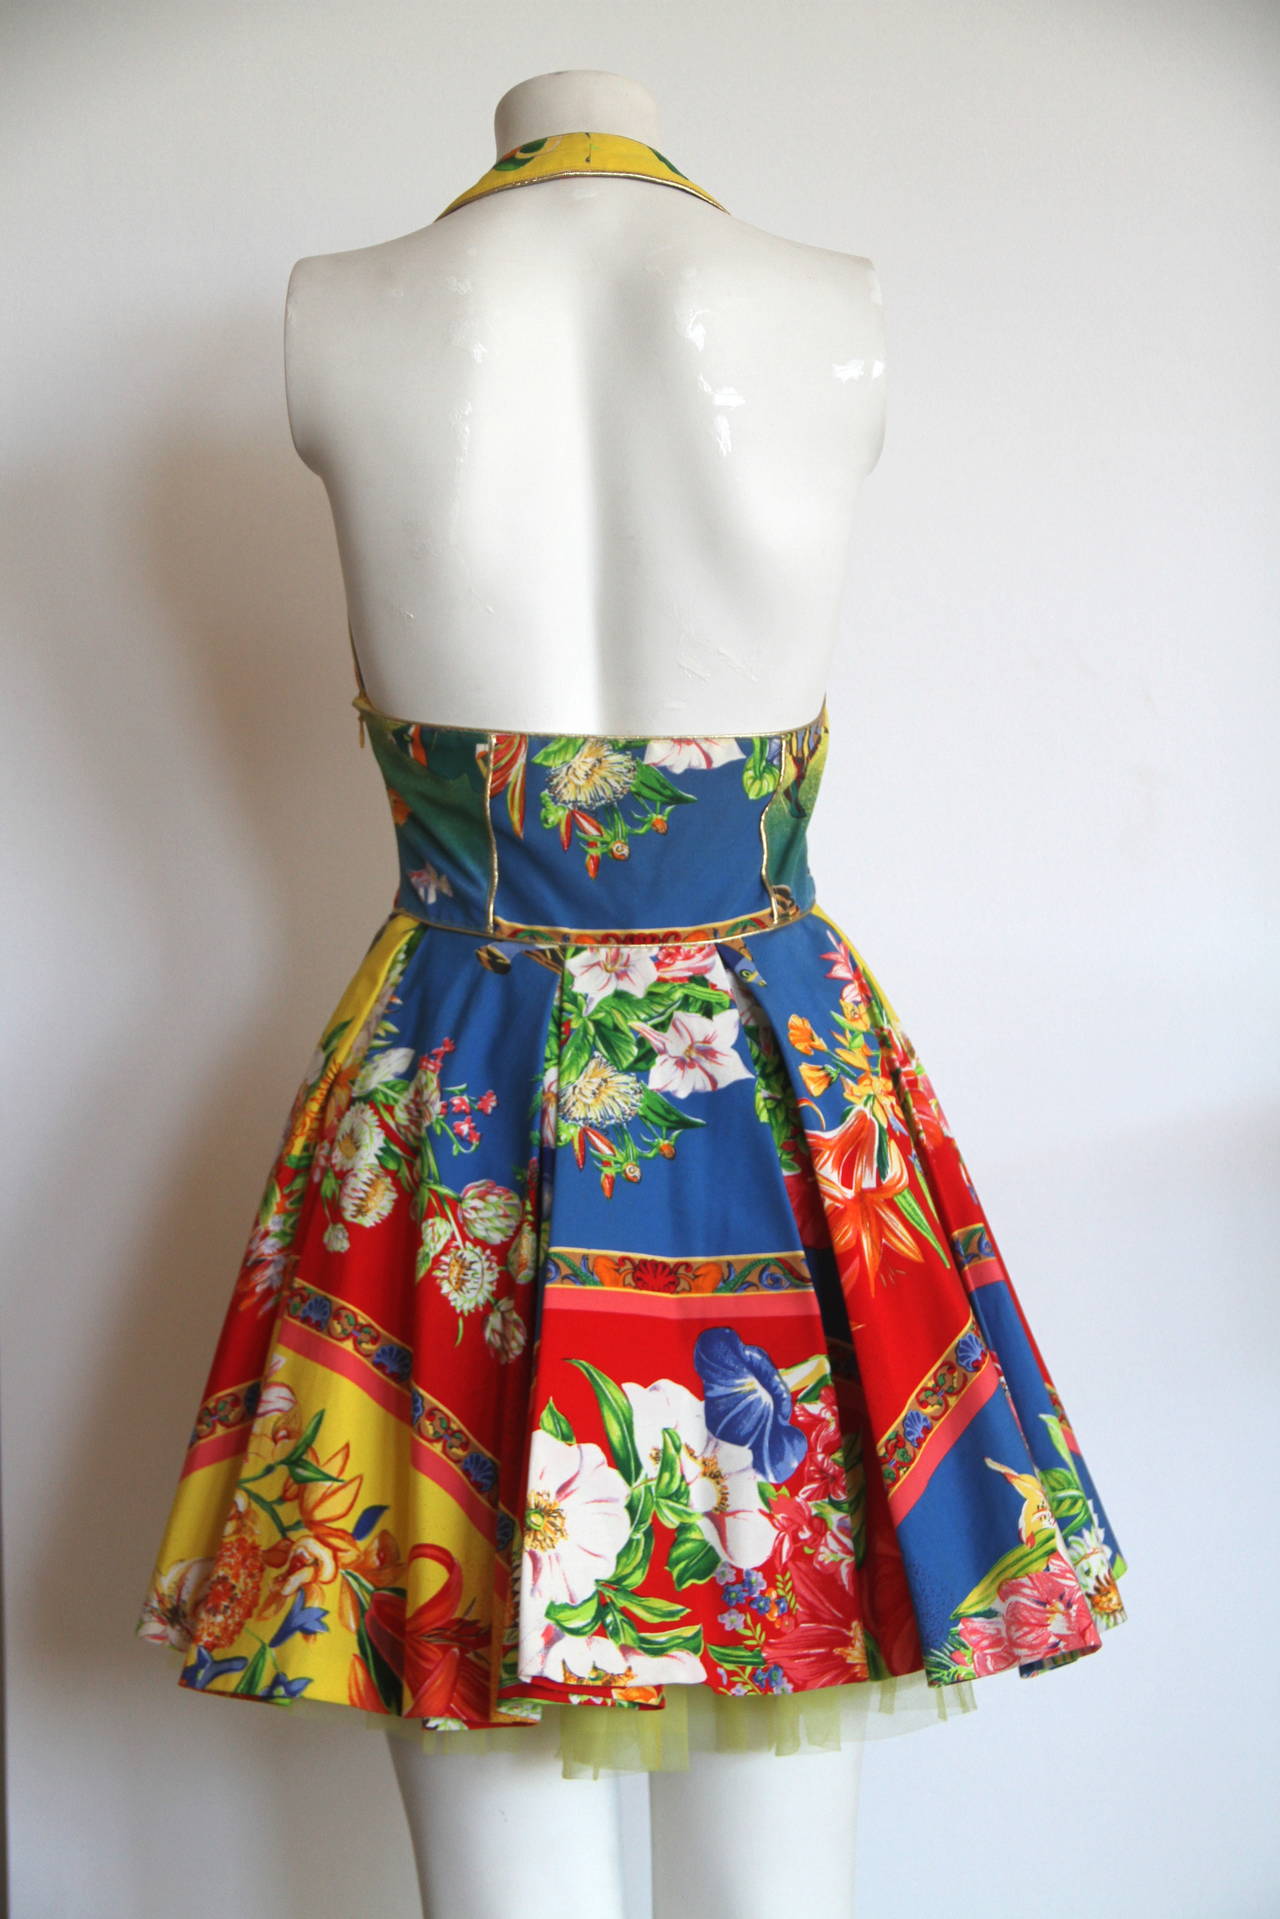 Gianni Versace Versus Printed Dress Spring 1993 In Excellent Condition For Sale In W1, GB